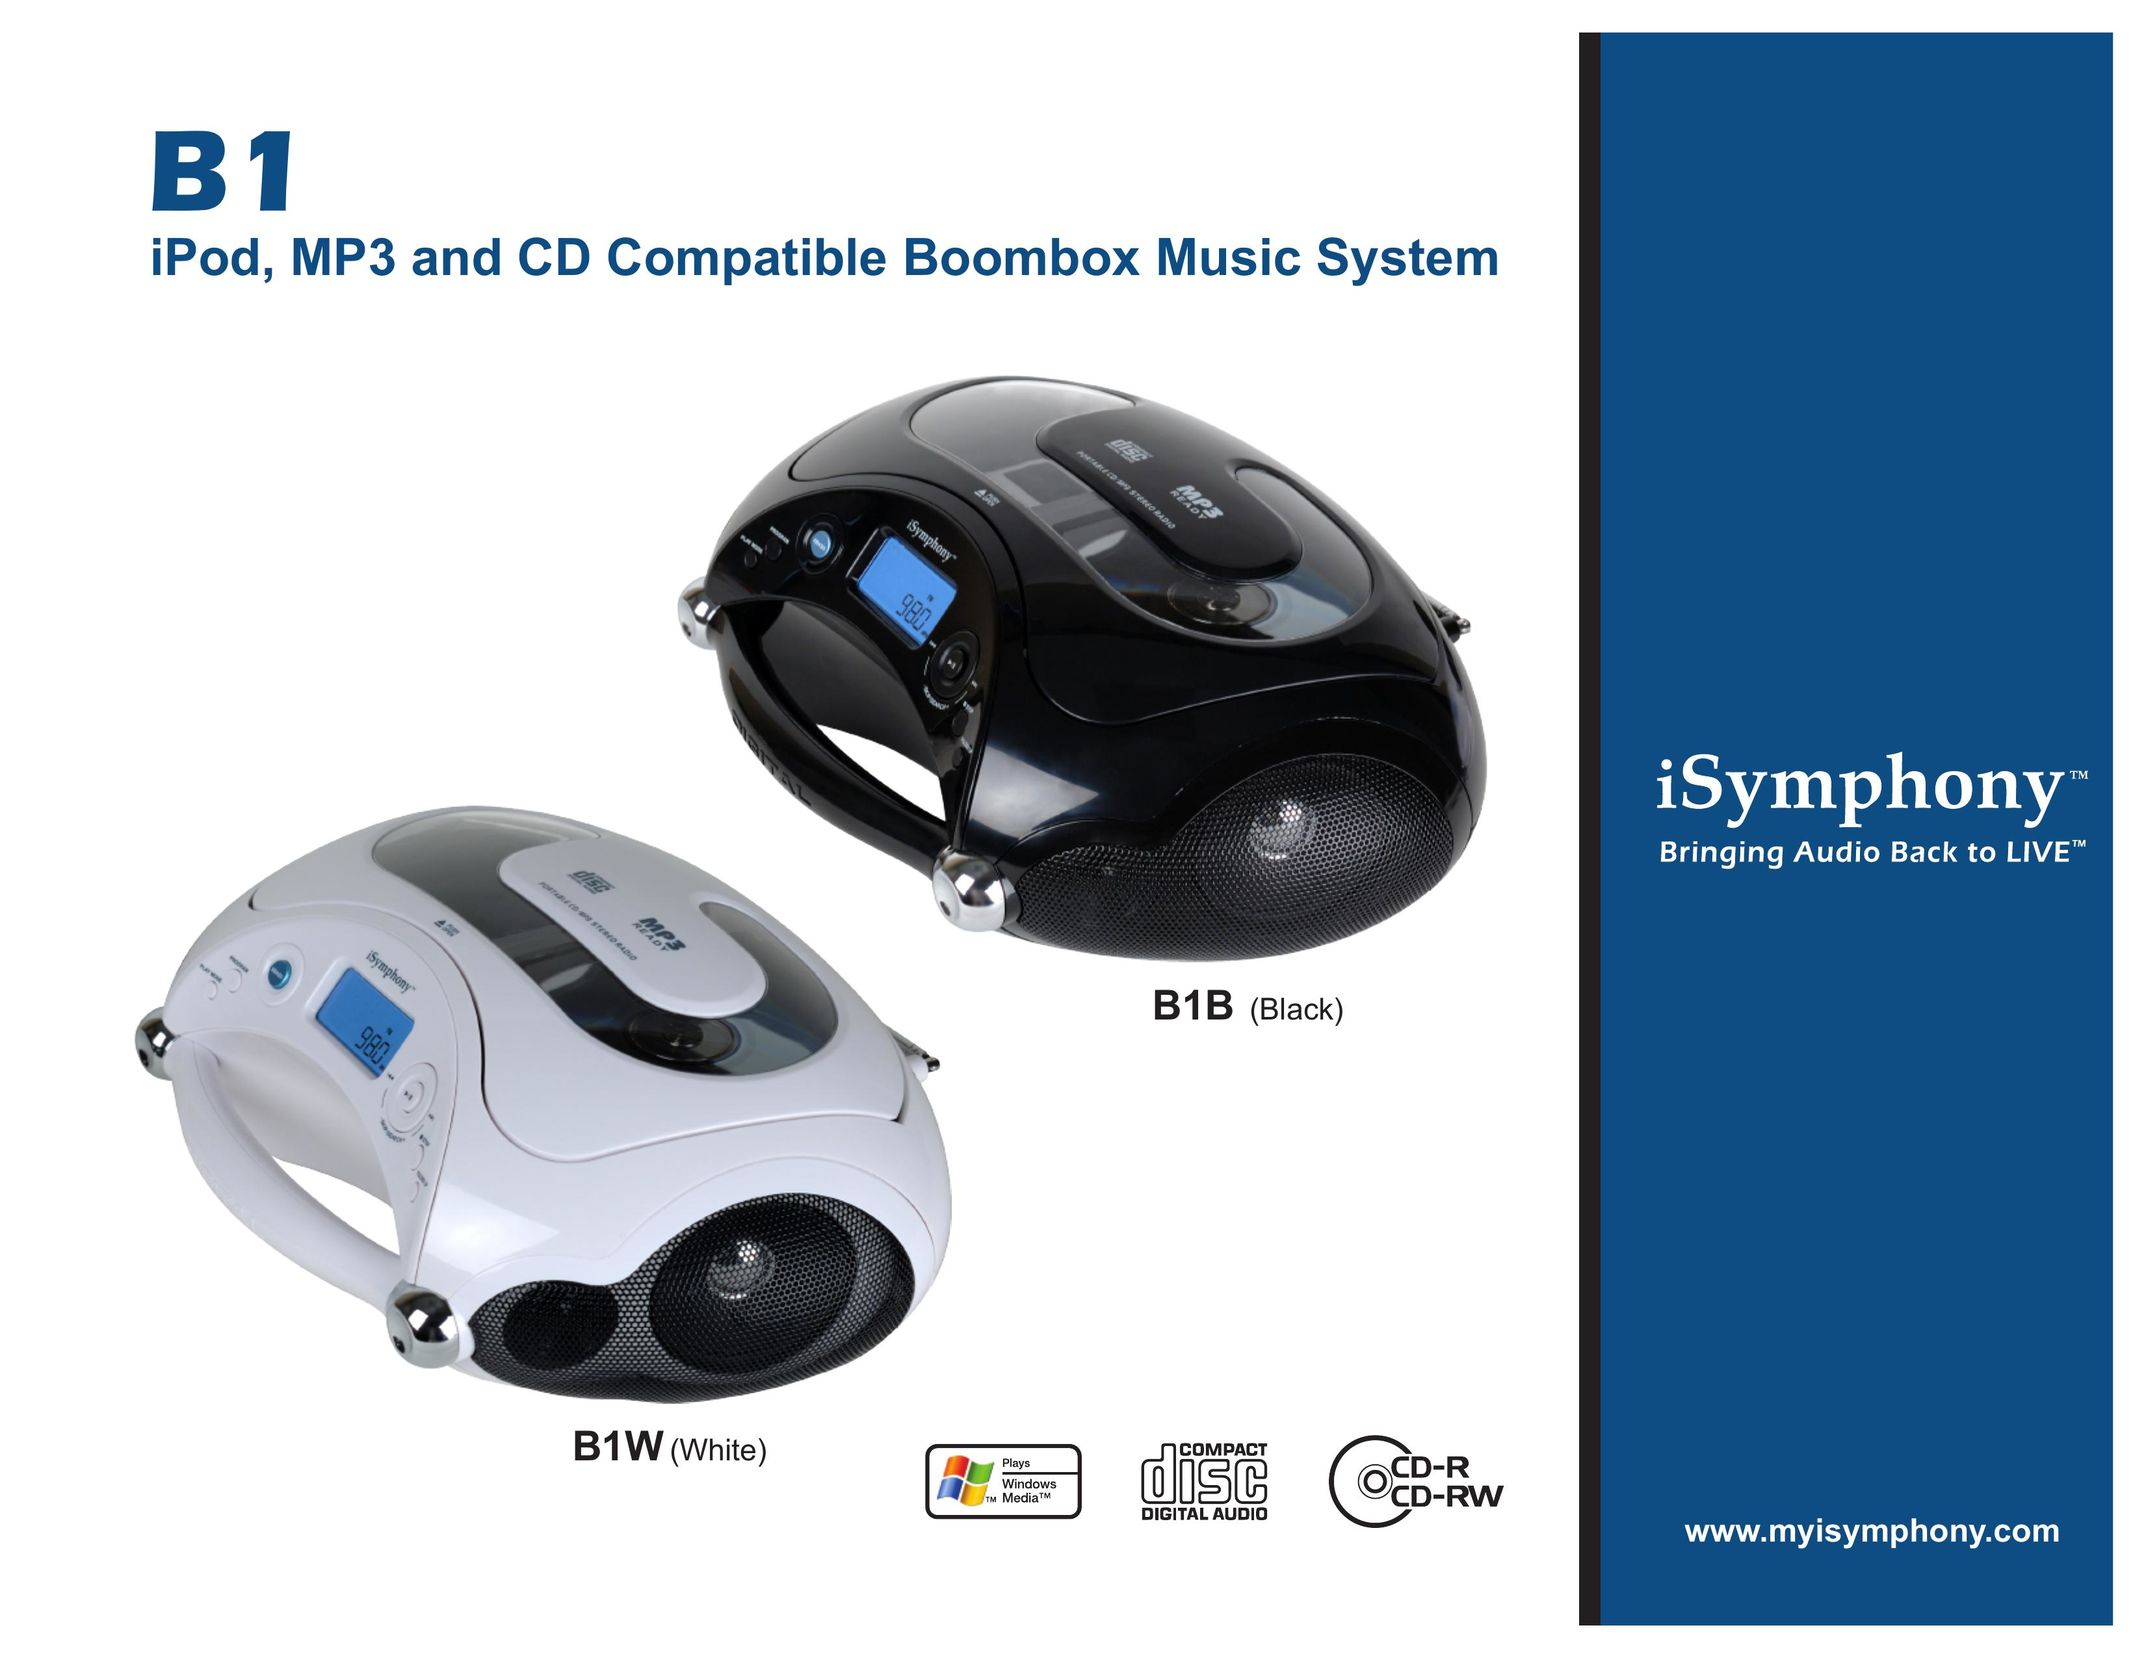 iSymphony B1B Portable Stereo System User Manual